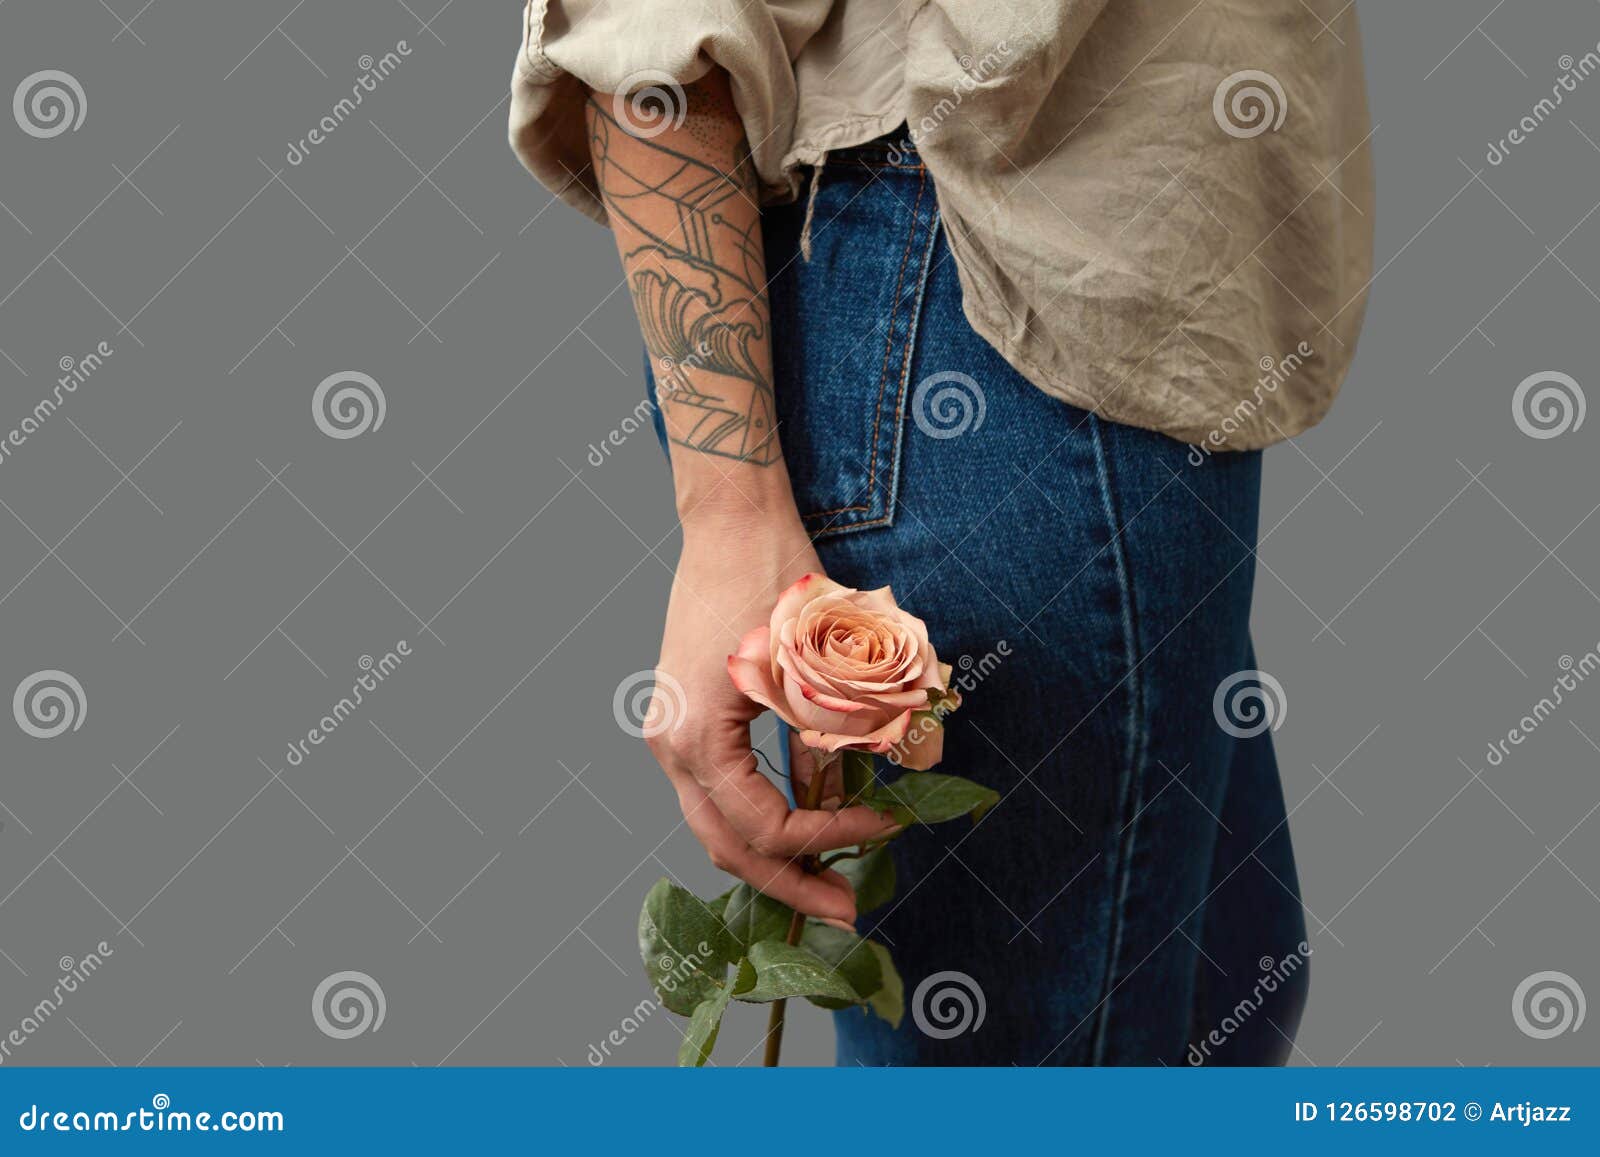 Premium Photo  Tattooed hand with a rose